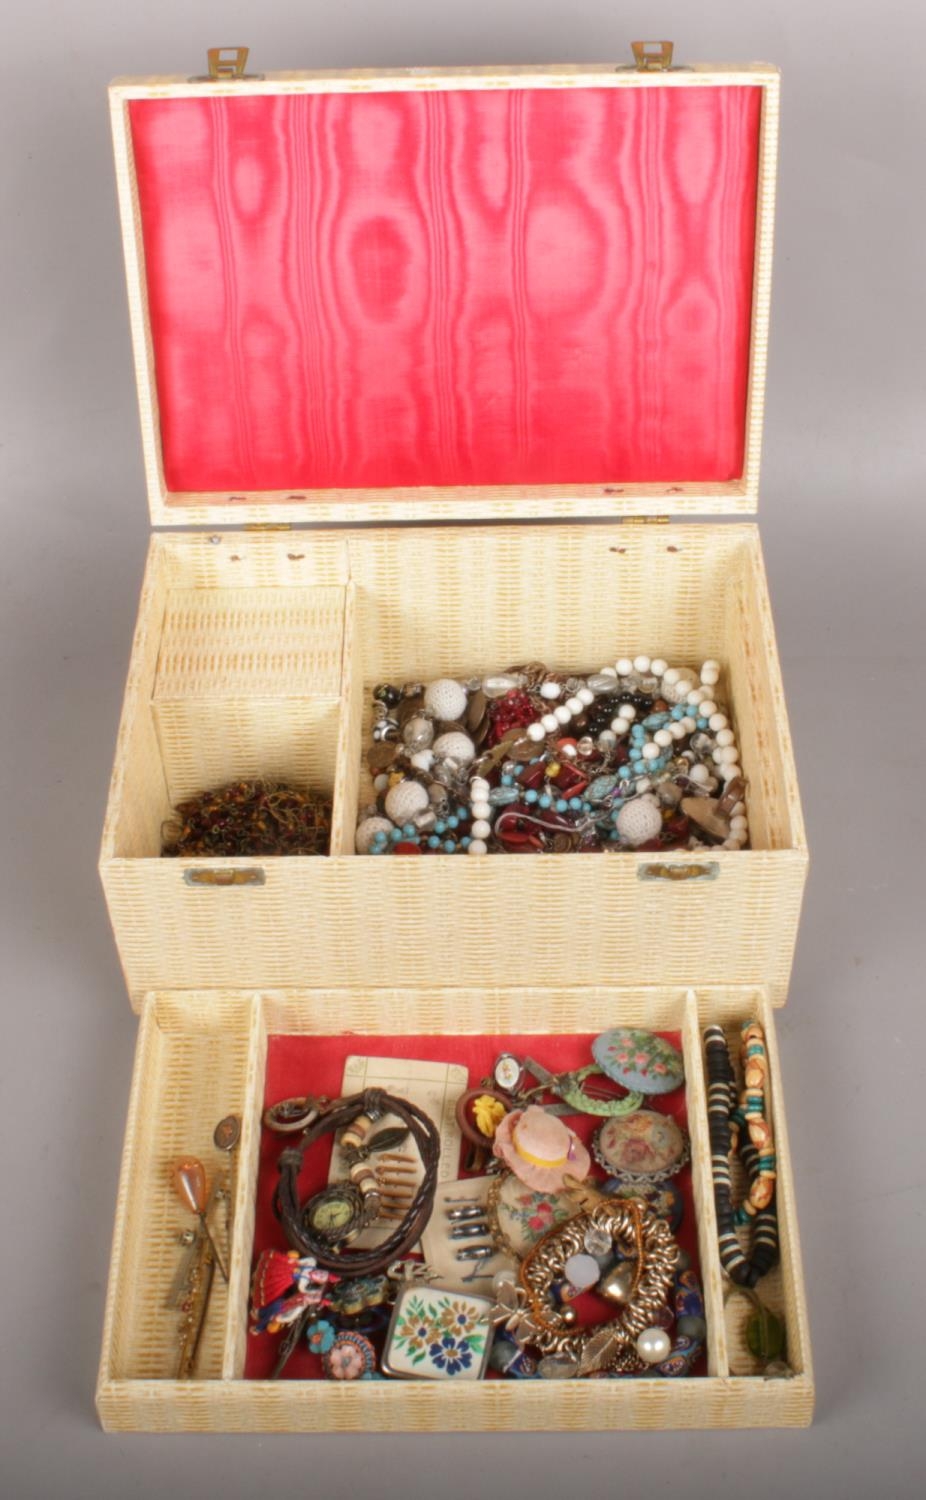 A Musical Jewellery Box with Costume Jewellery Contents. Mechanism of Music Box will need